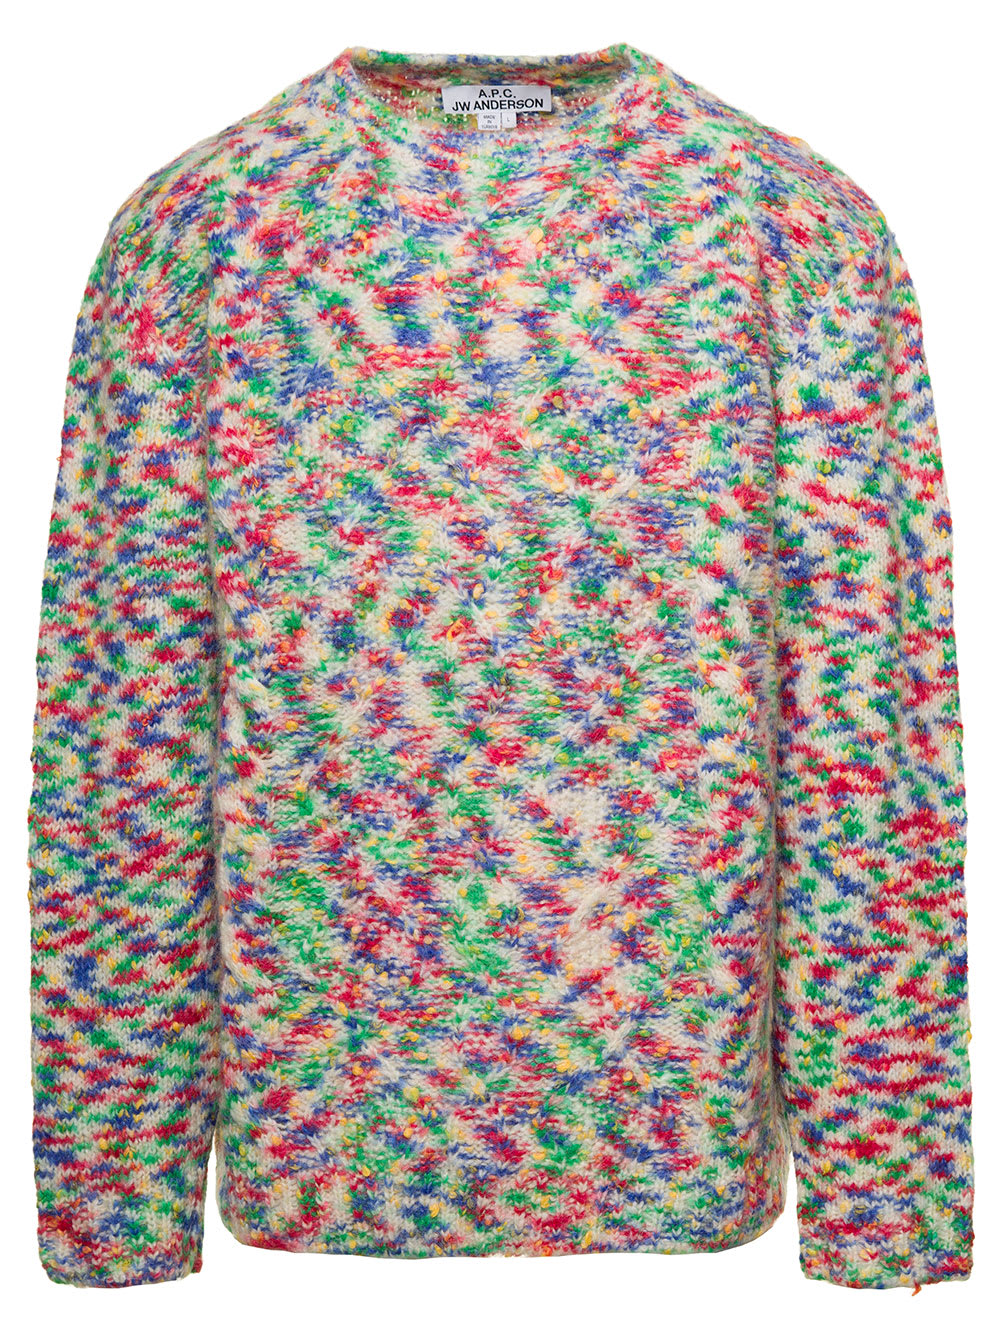 APC CONNOR MULTICOLOR KNIT SWEATER IN WOOL AND MOHAIR MAN